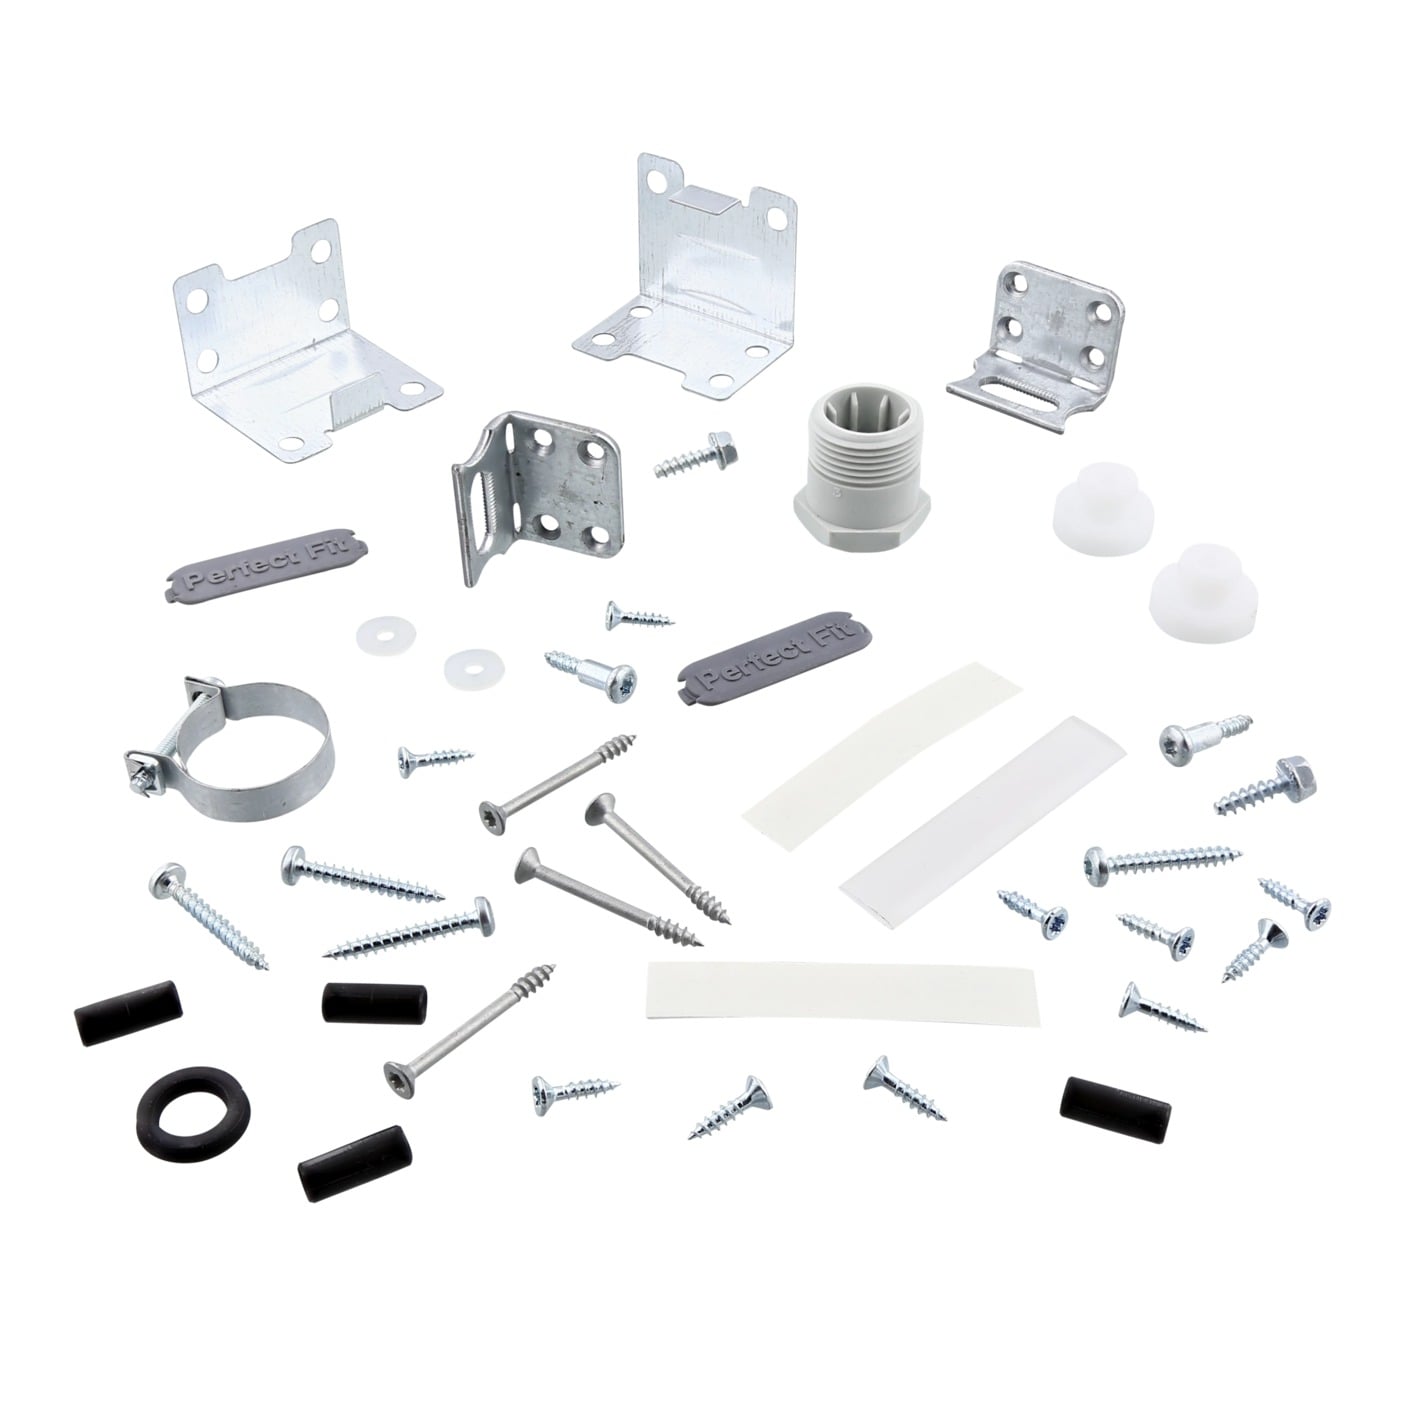 Installation kit of the façade of the dishwasher ELECTROLUX / AEG. Various parts of the installation of the façade of dishwashers dispensers, etc.